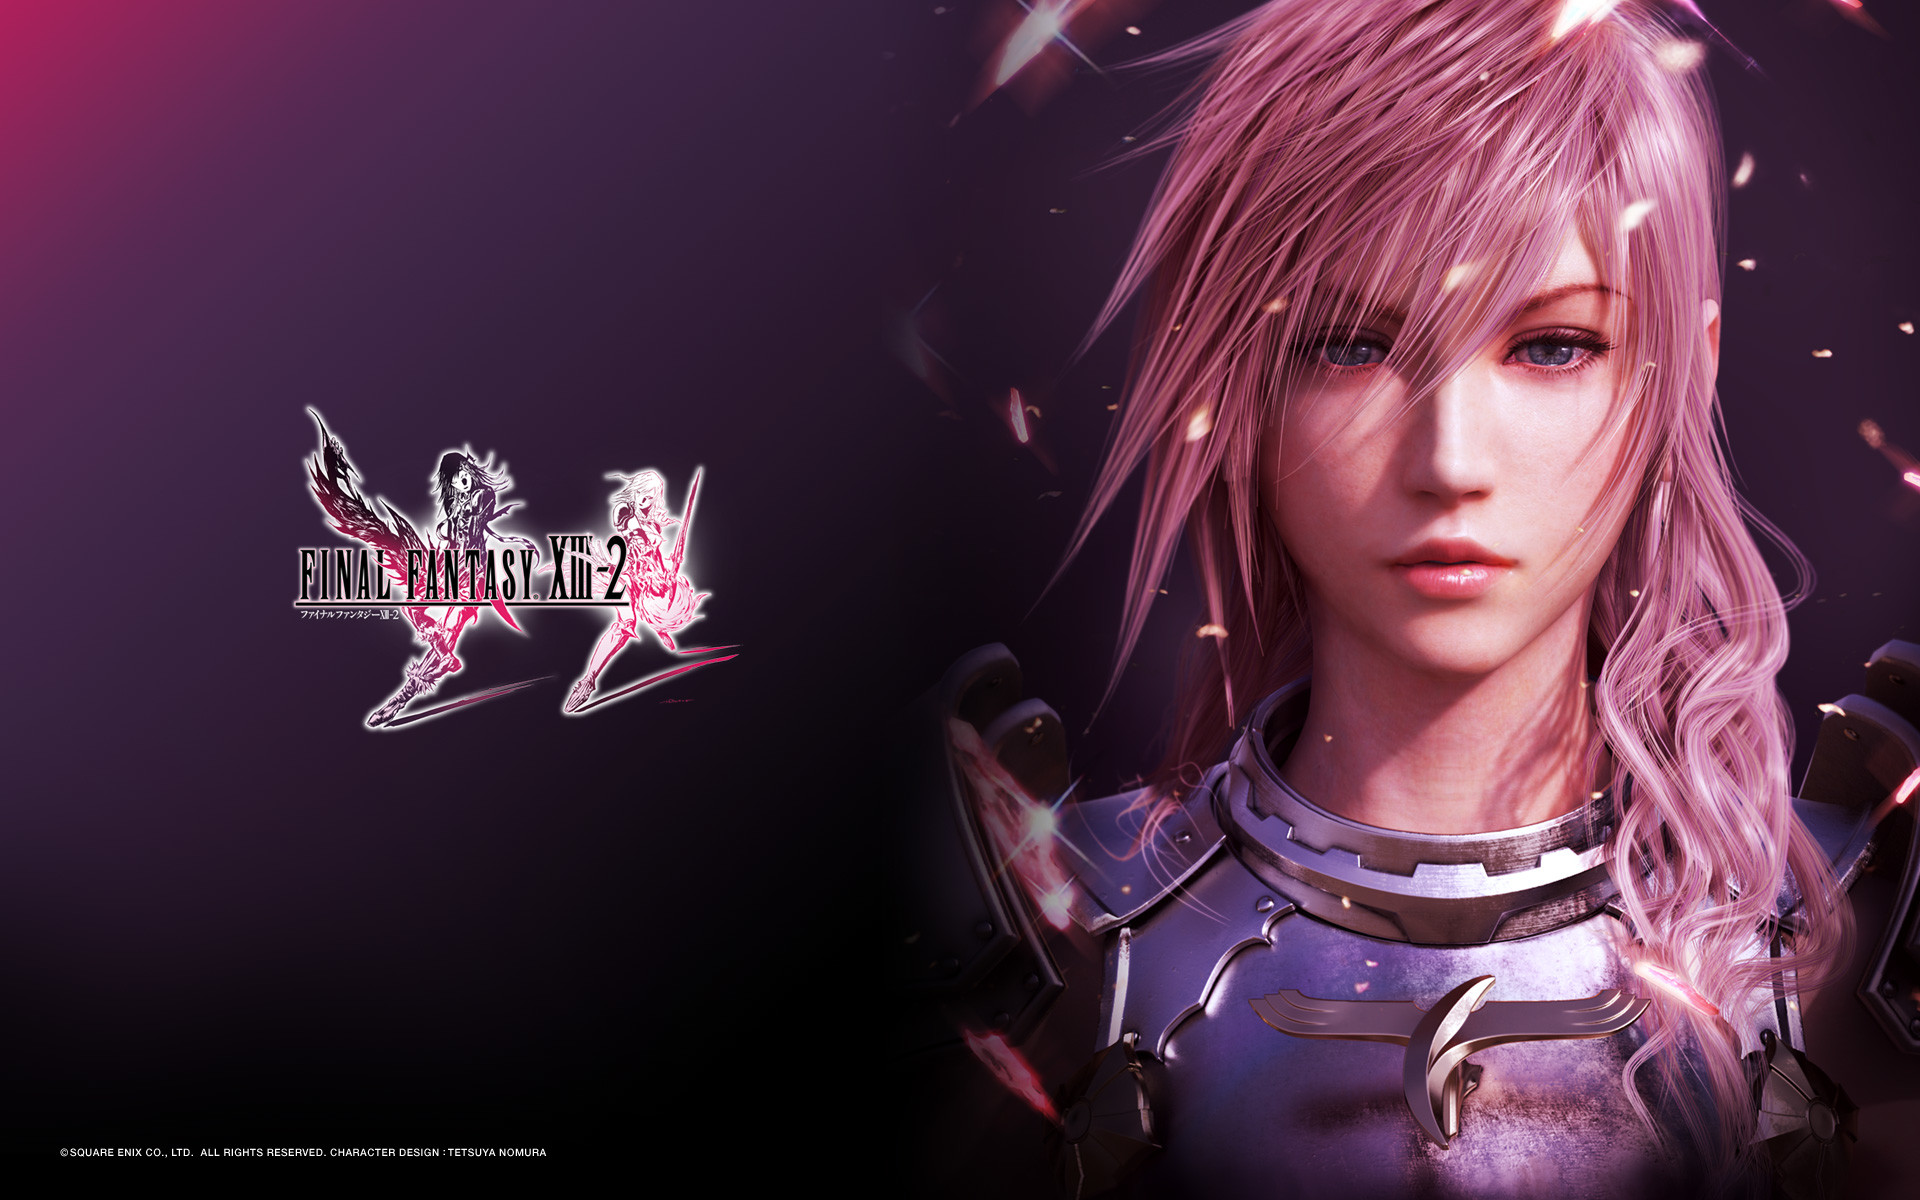 1920x1200 Final Fantasy XIII-2 - Wallpapers